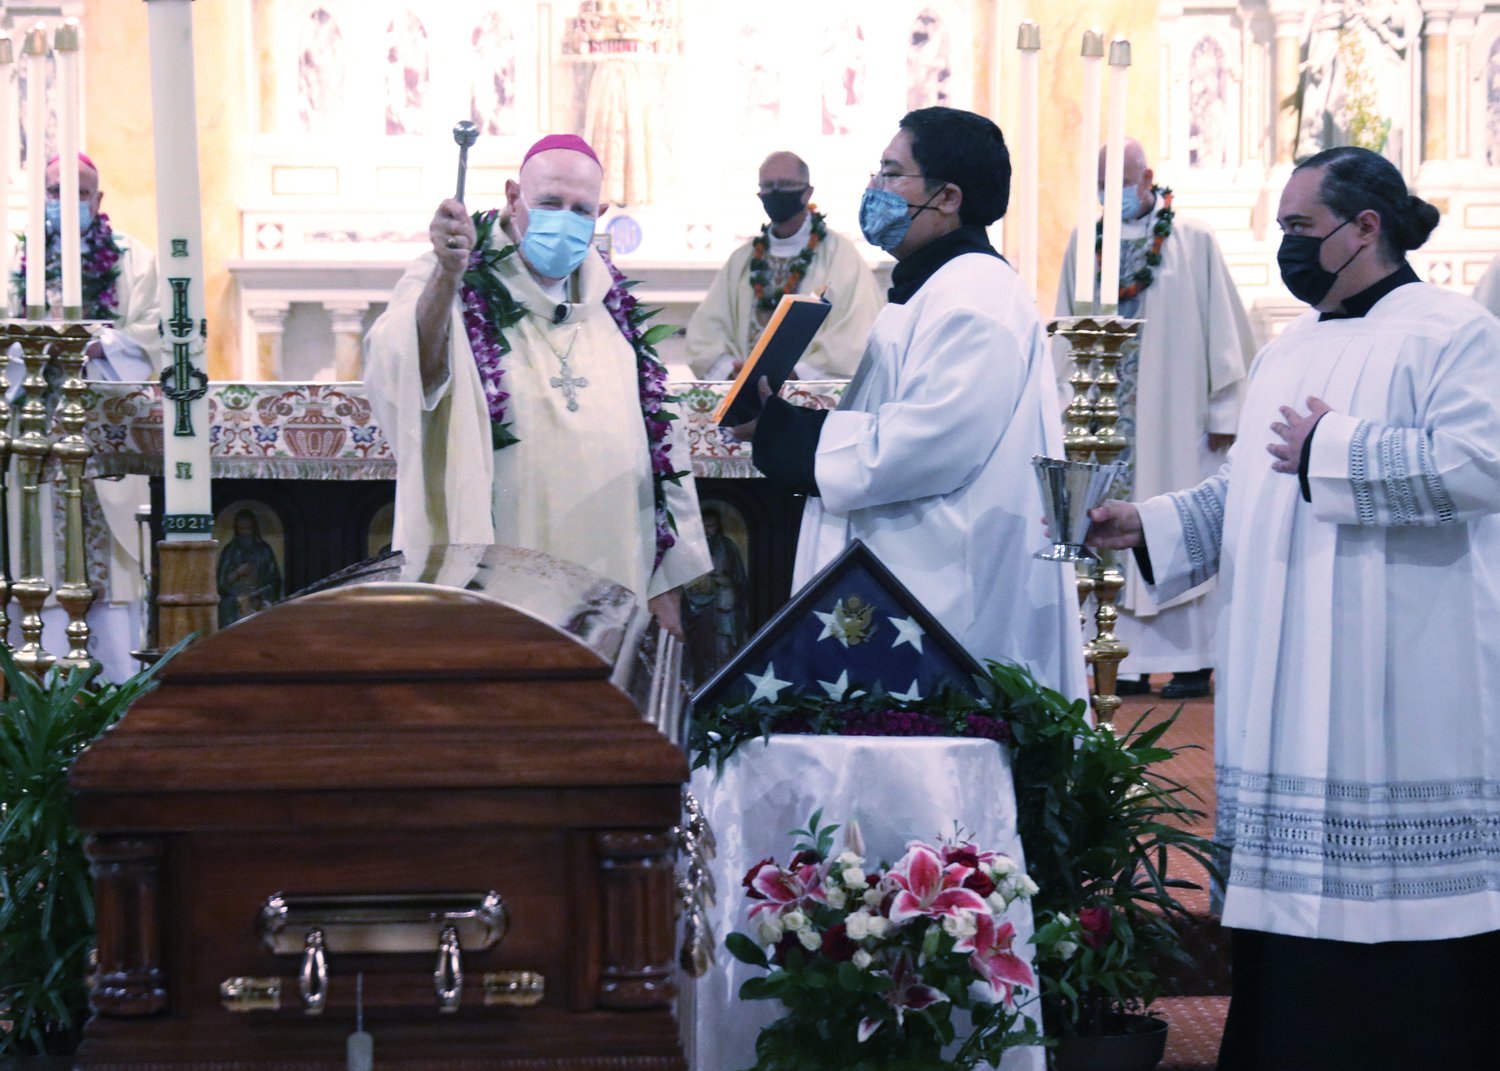 Bishop Larry R. Silva of Honolulu blesses the casket of Father Emil J. Kapaun during a memorial Mass at the Cathedral Basilica of Our Lady of Peace in Honolulu Sept. 23, 2021. A candidate for sainthood, Kapaun died May 23, 1951, while ministering to prisoners of war during the Korean War. The priest's remains were being transferred from Punchbowl's National Cemetery of the Pacific to his home Diocese of Wichita, Kan.